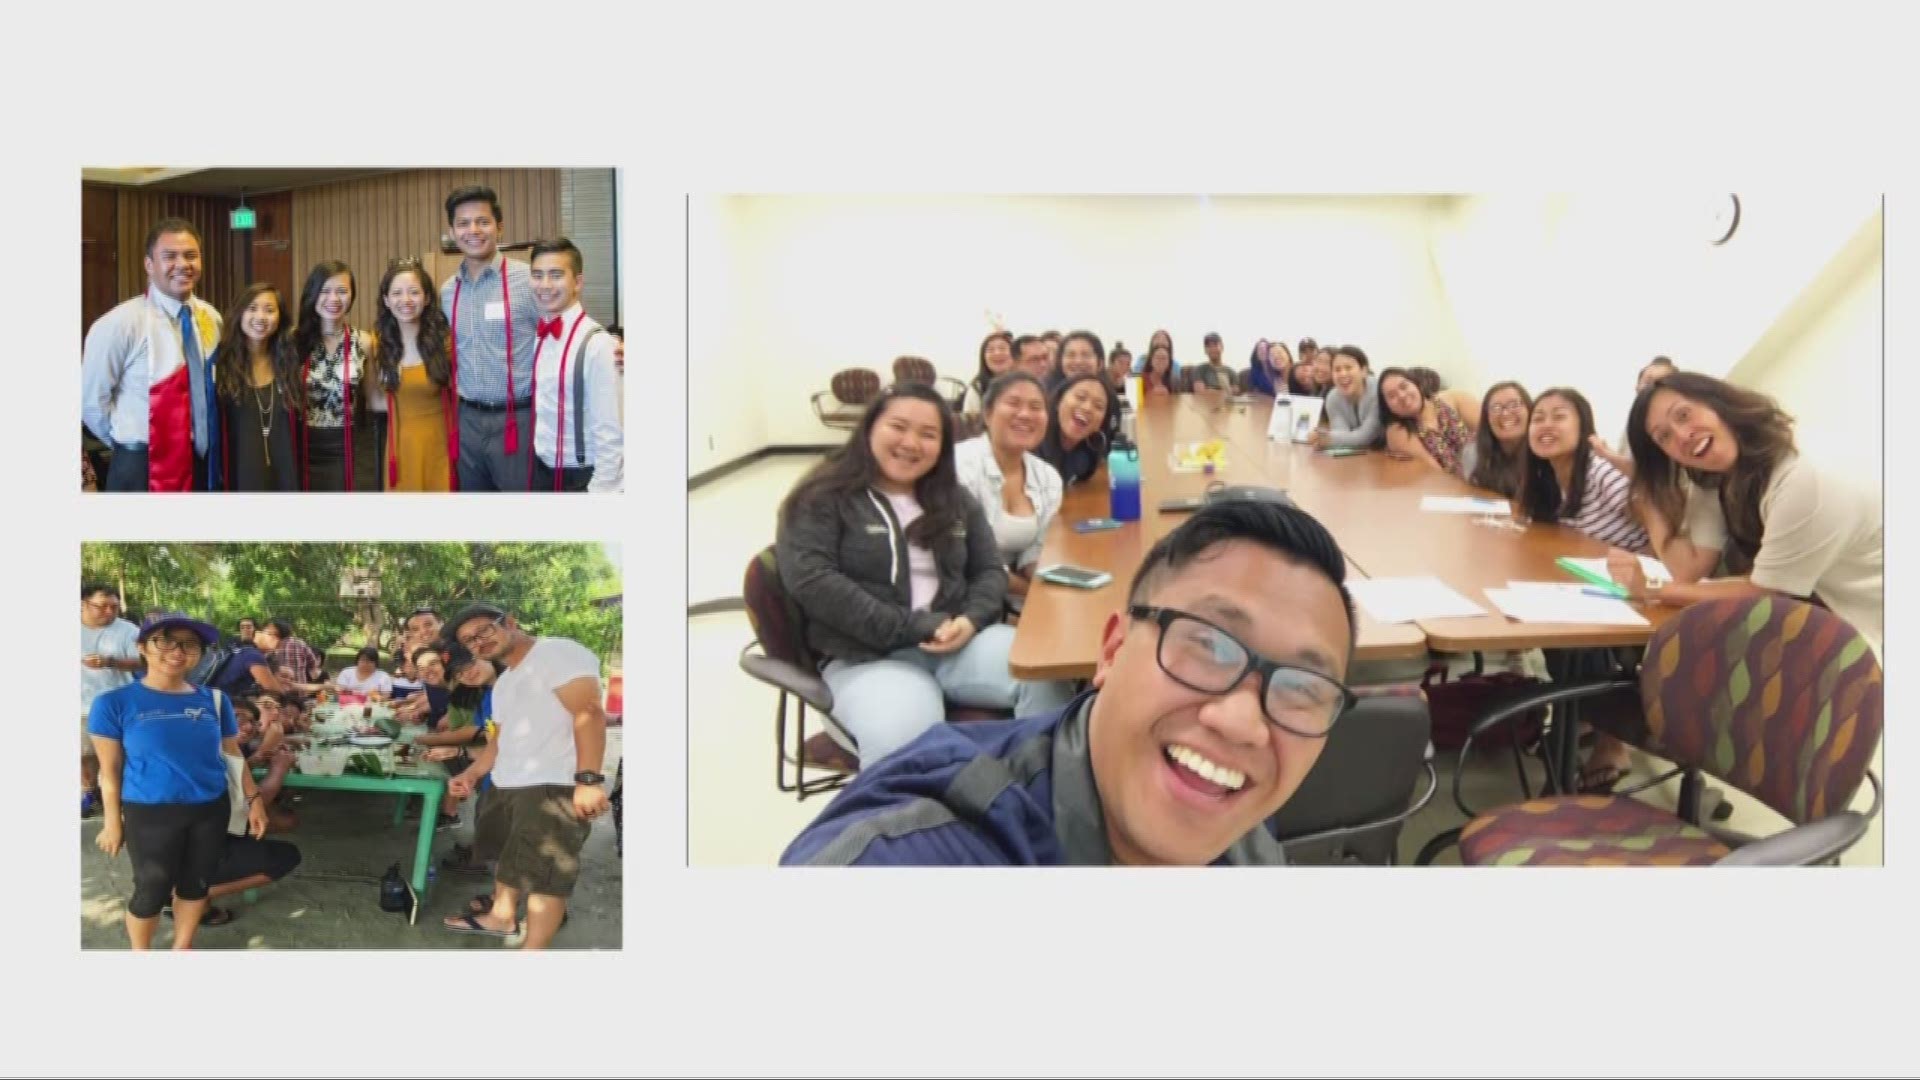 The University of California is launching a system-wide Filipino-American studies program, with a center being erected on the campus of UC Davis.